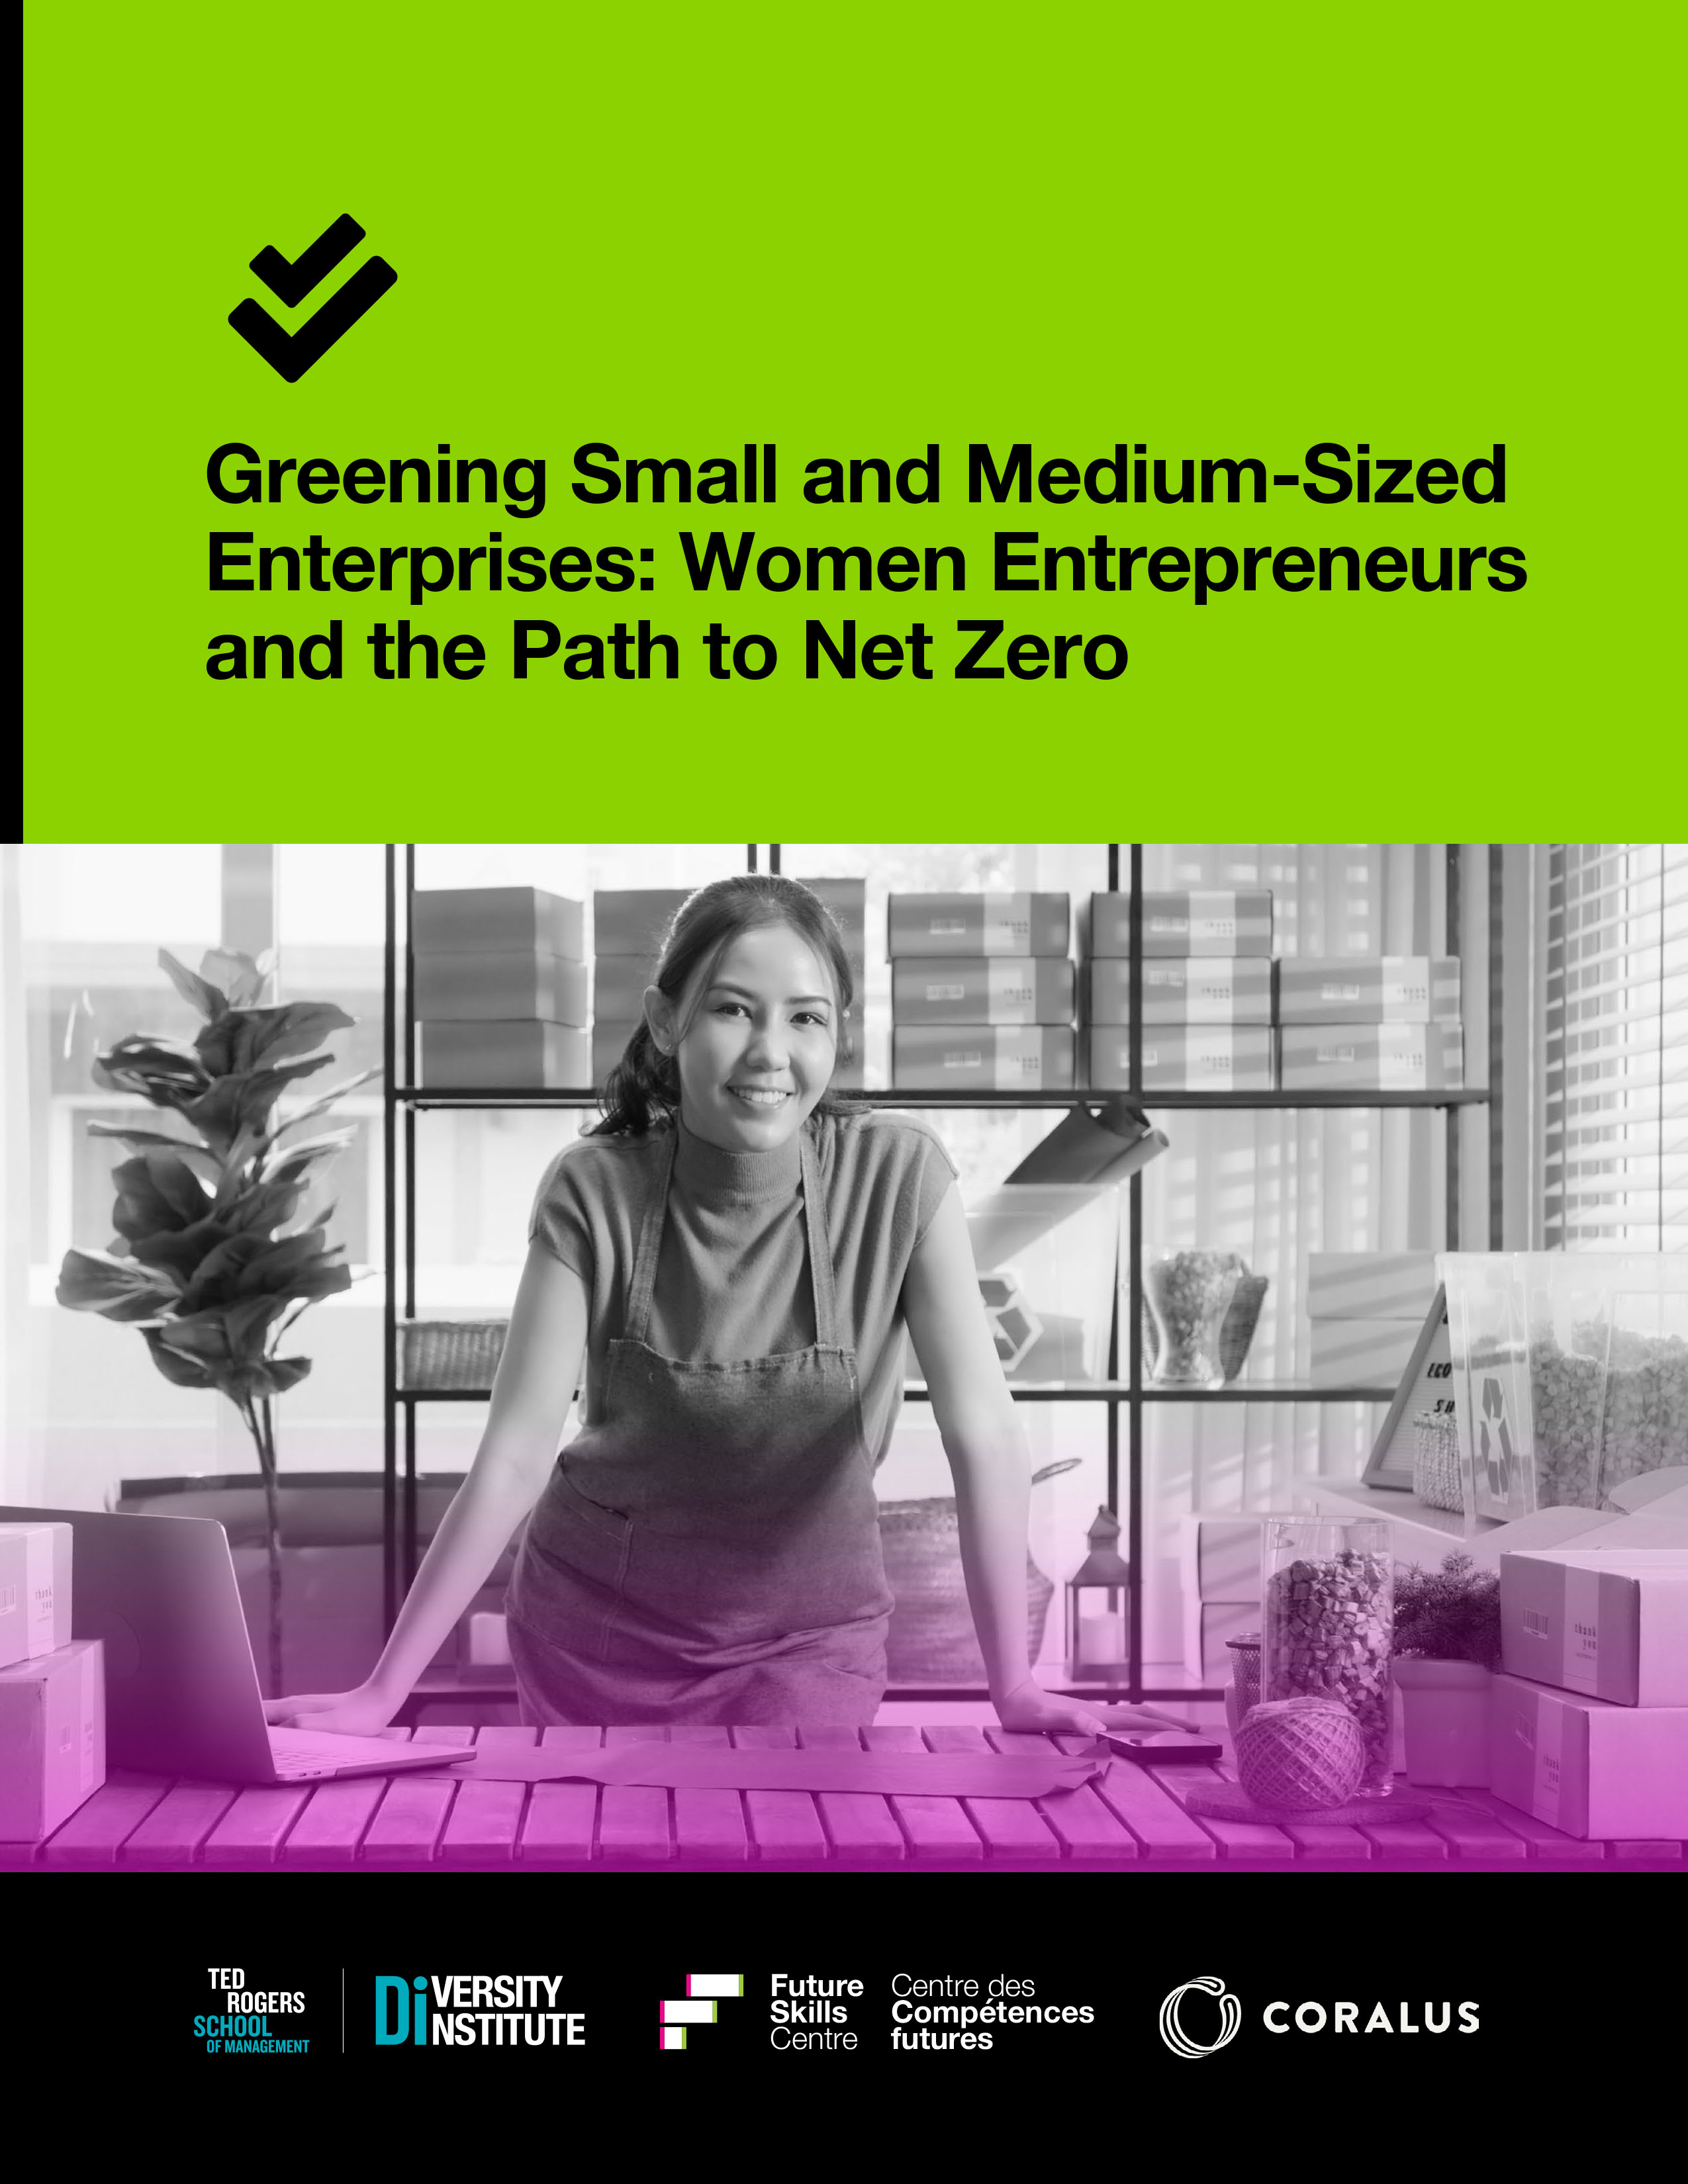 A young woman entrepreneur smiles proudly on the cover of the Greening Small and Medium-Sized Enterprises report. 